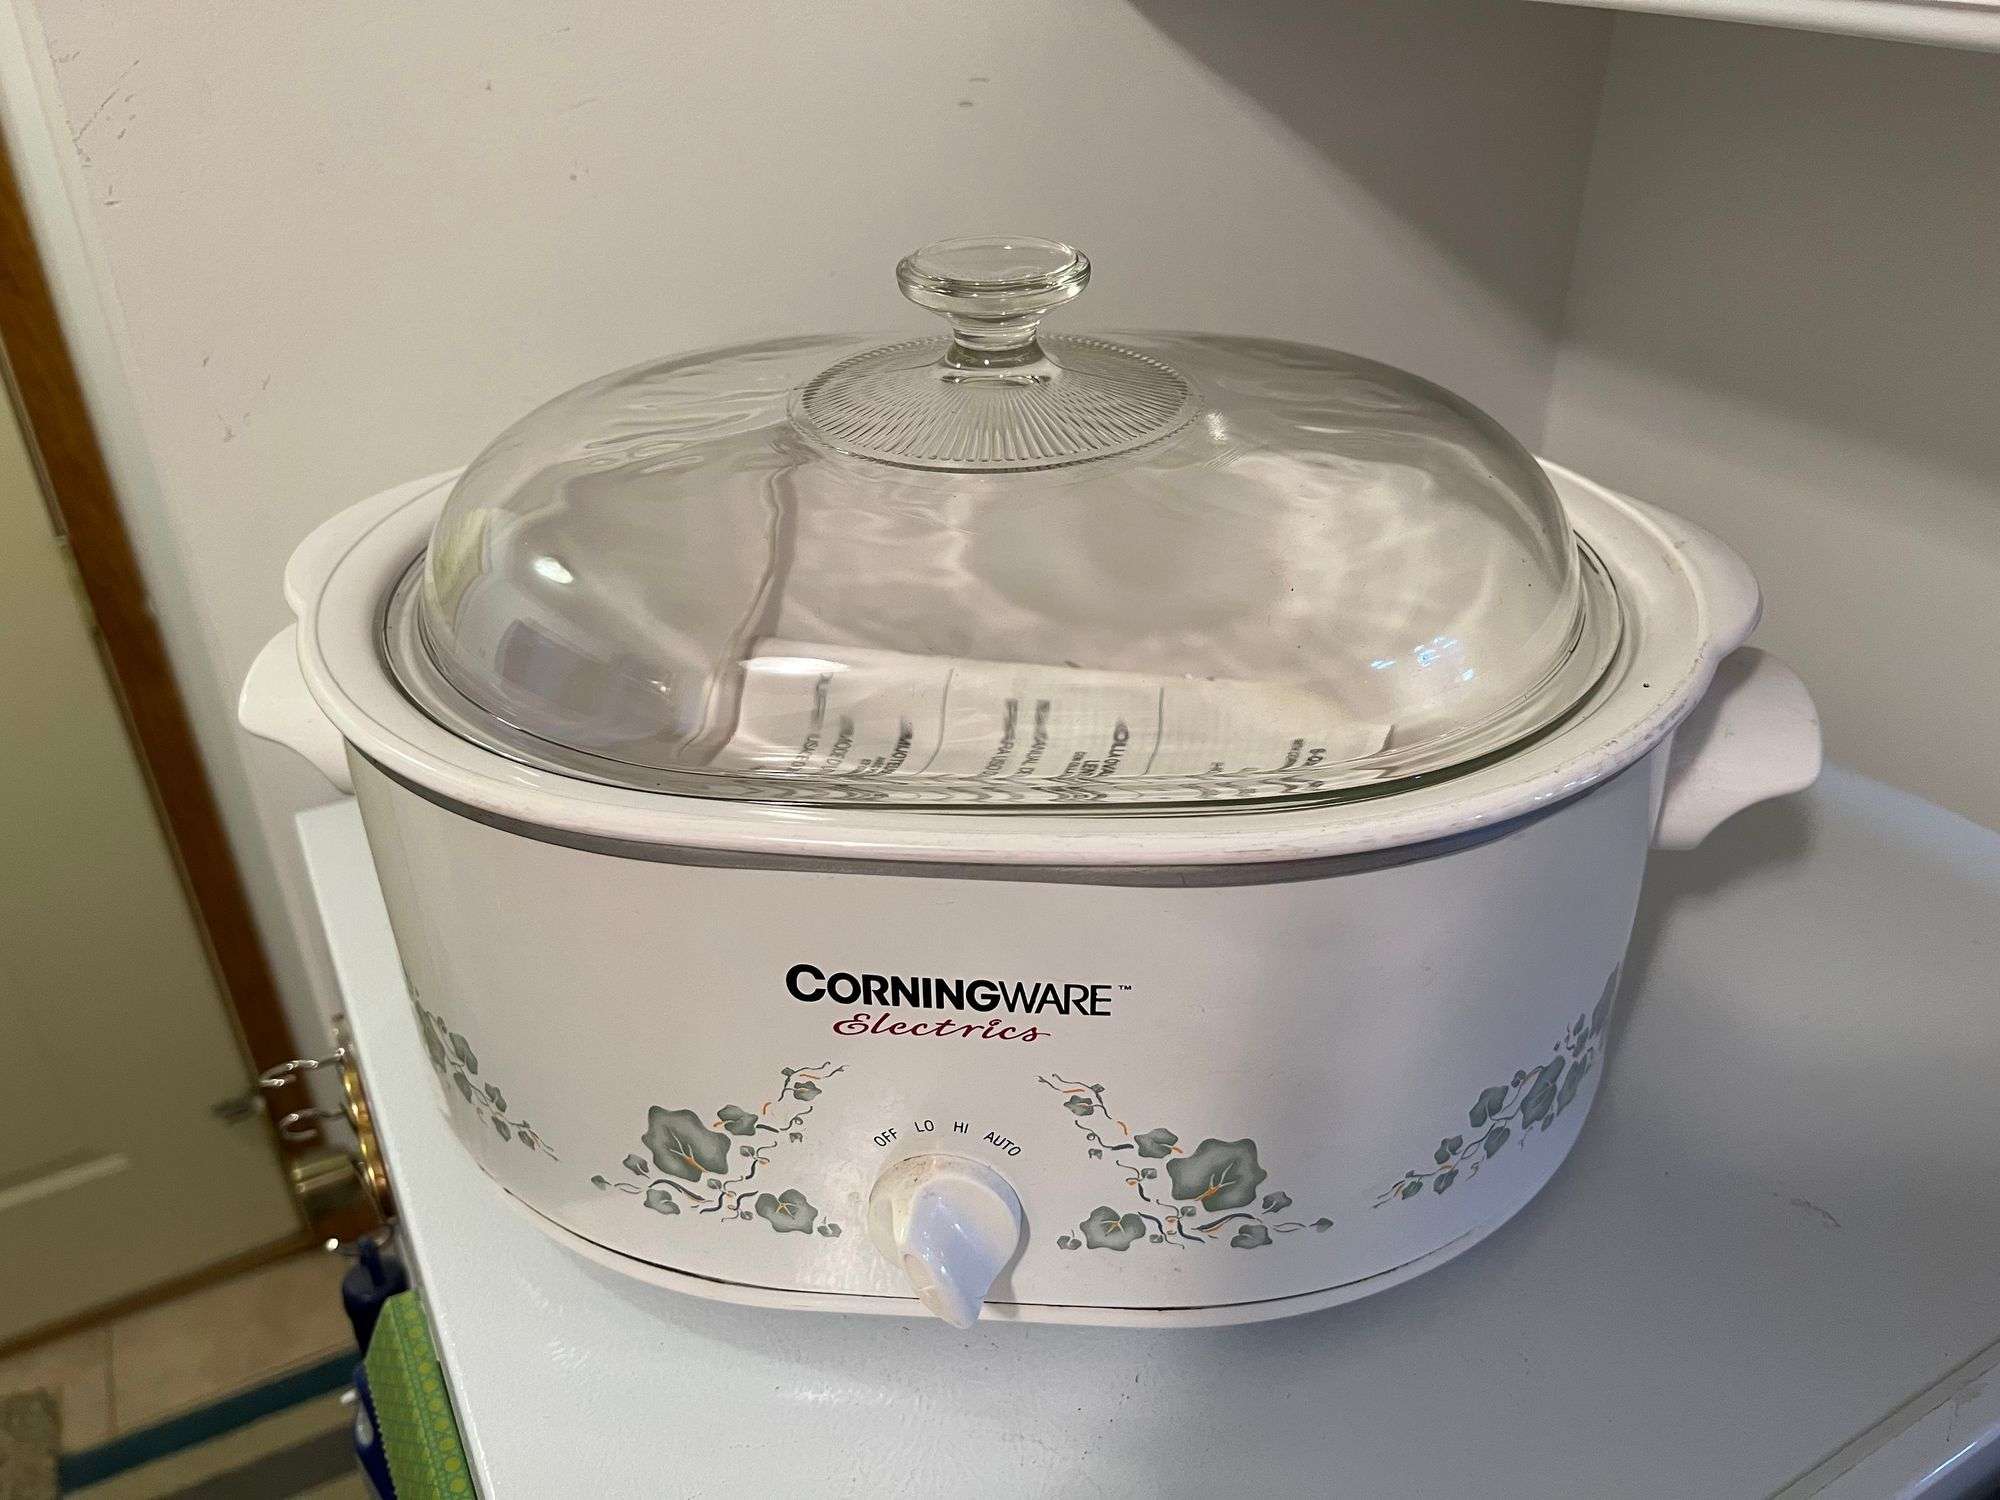 The Ultimate Slow Cooker For Travel- Presto Nomad Review 